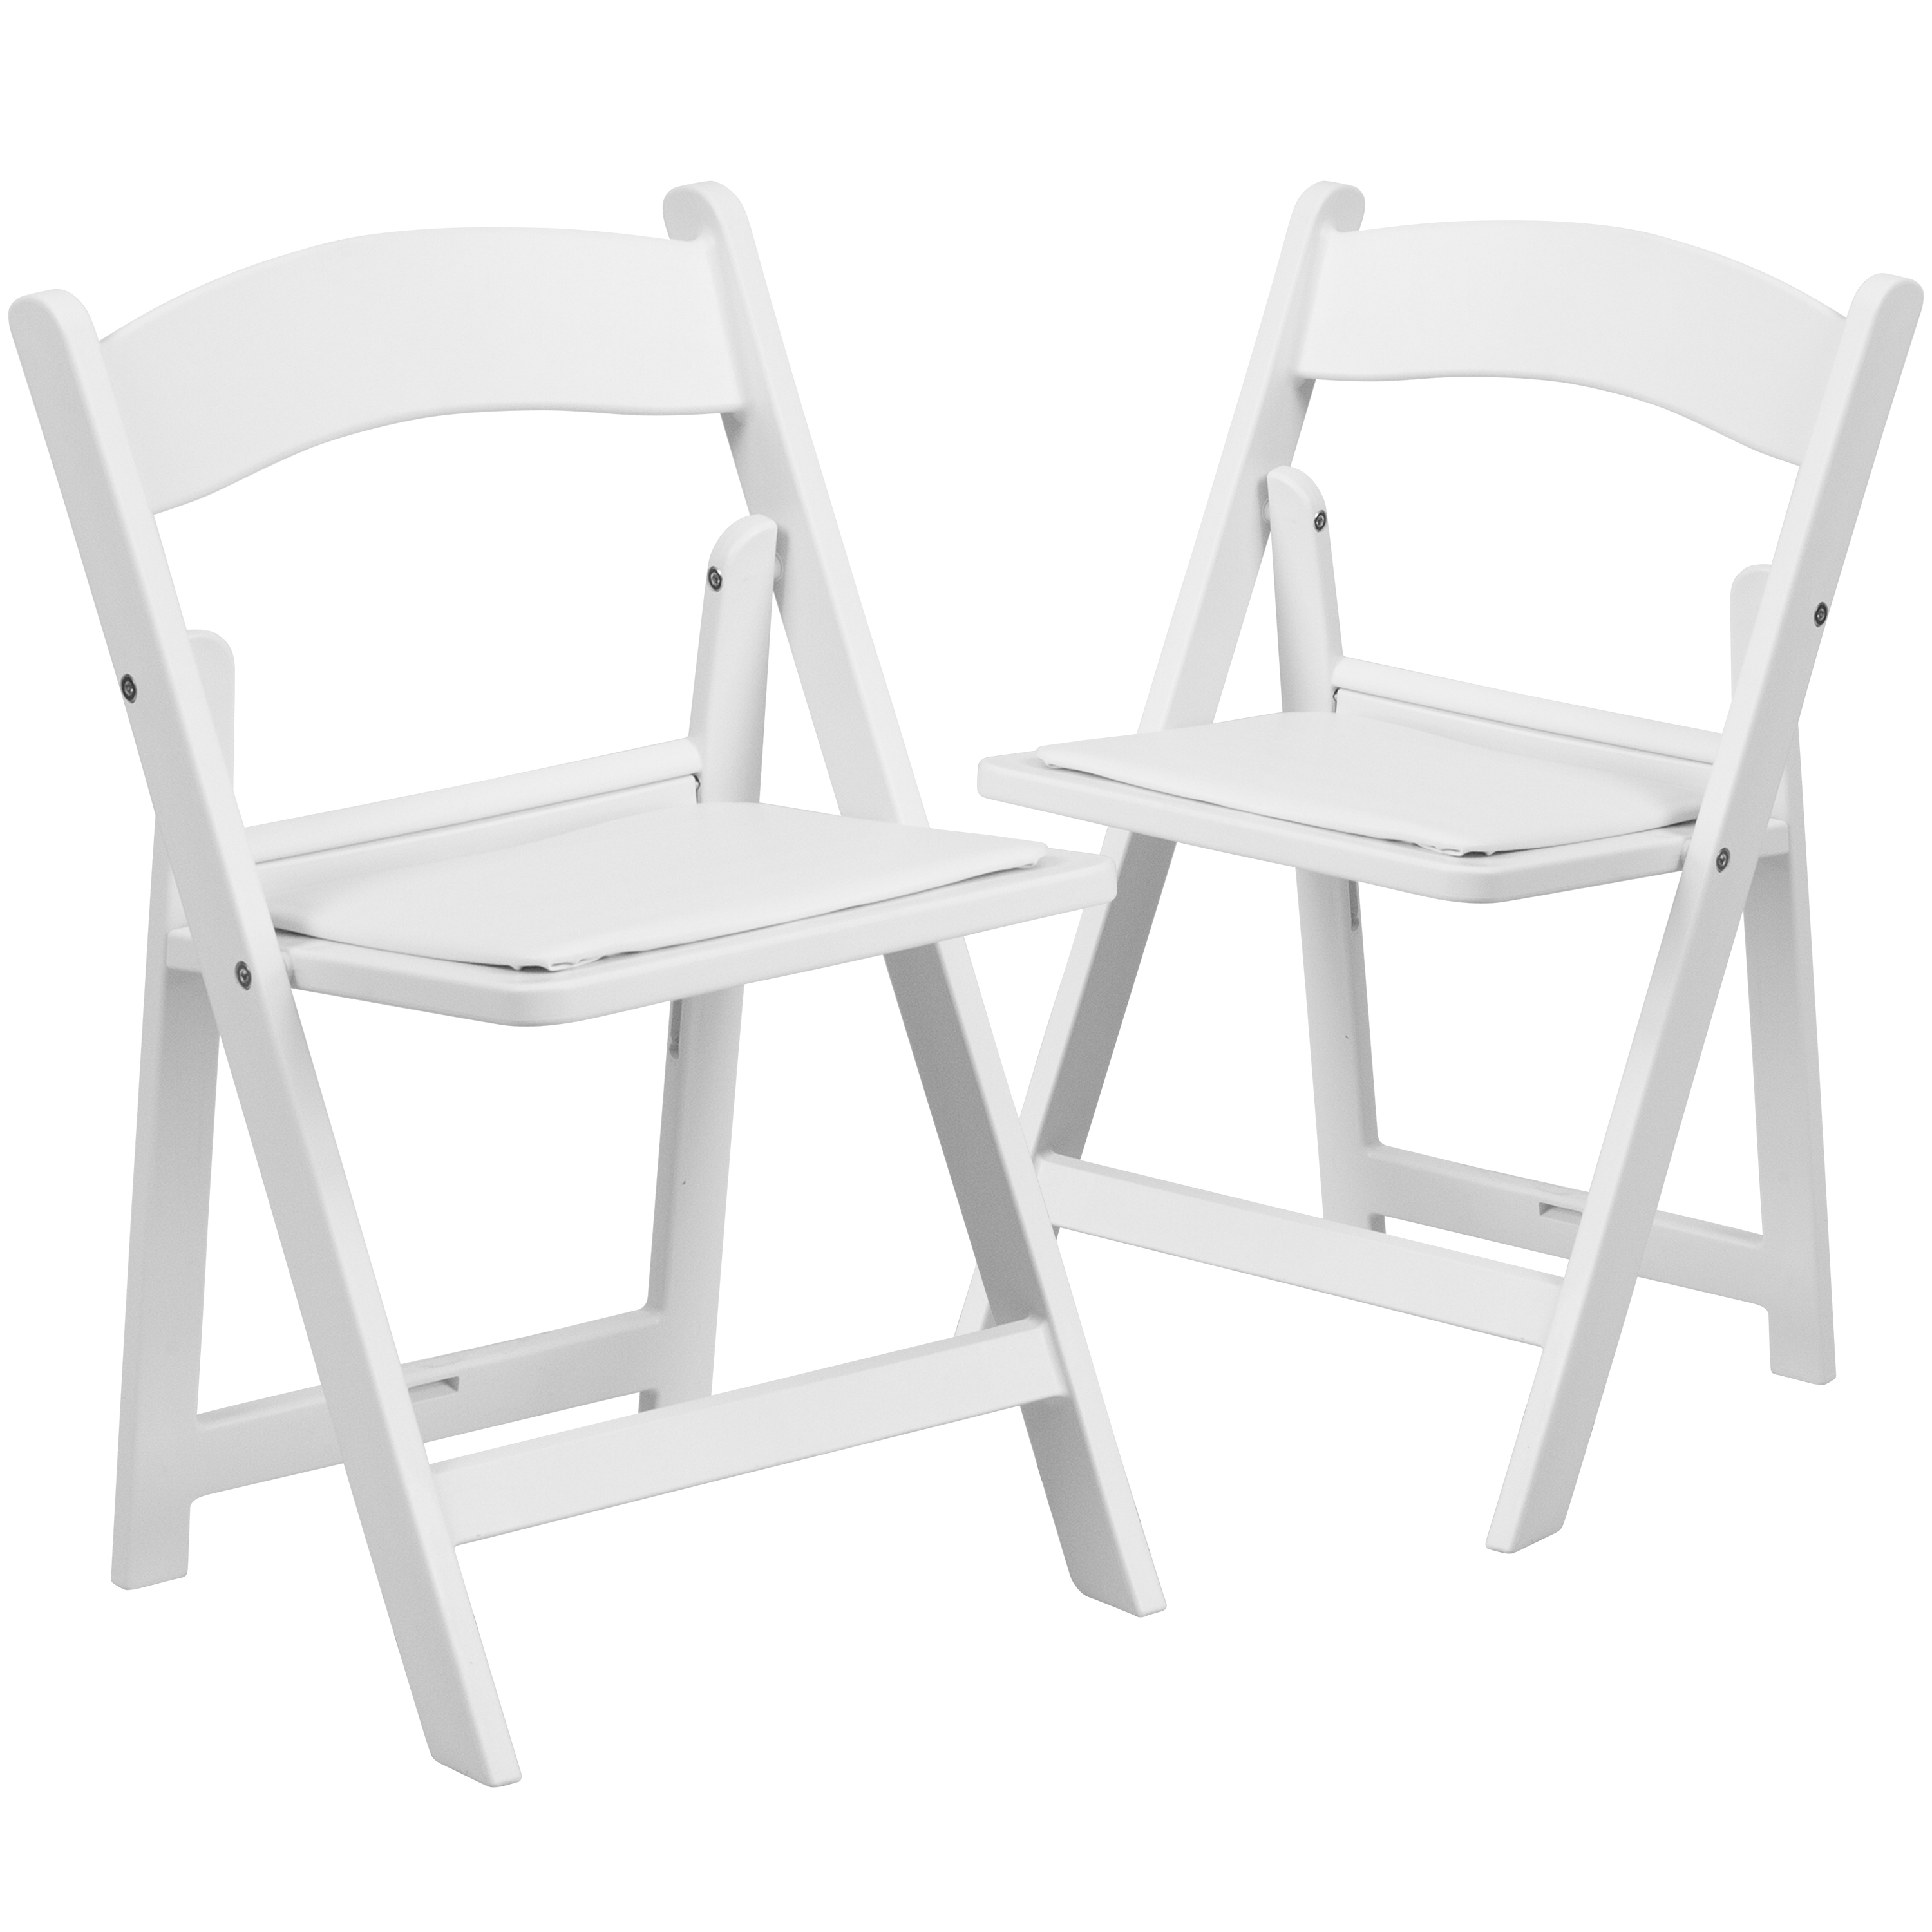 Flash Furniture 2-LE-L-1K-GG Hercules Kids White Resin Folding Chair with Vinyl Padded Seat, Set of 2 